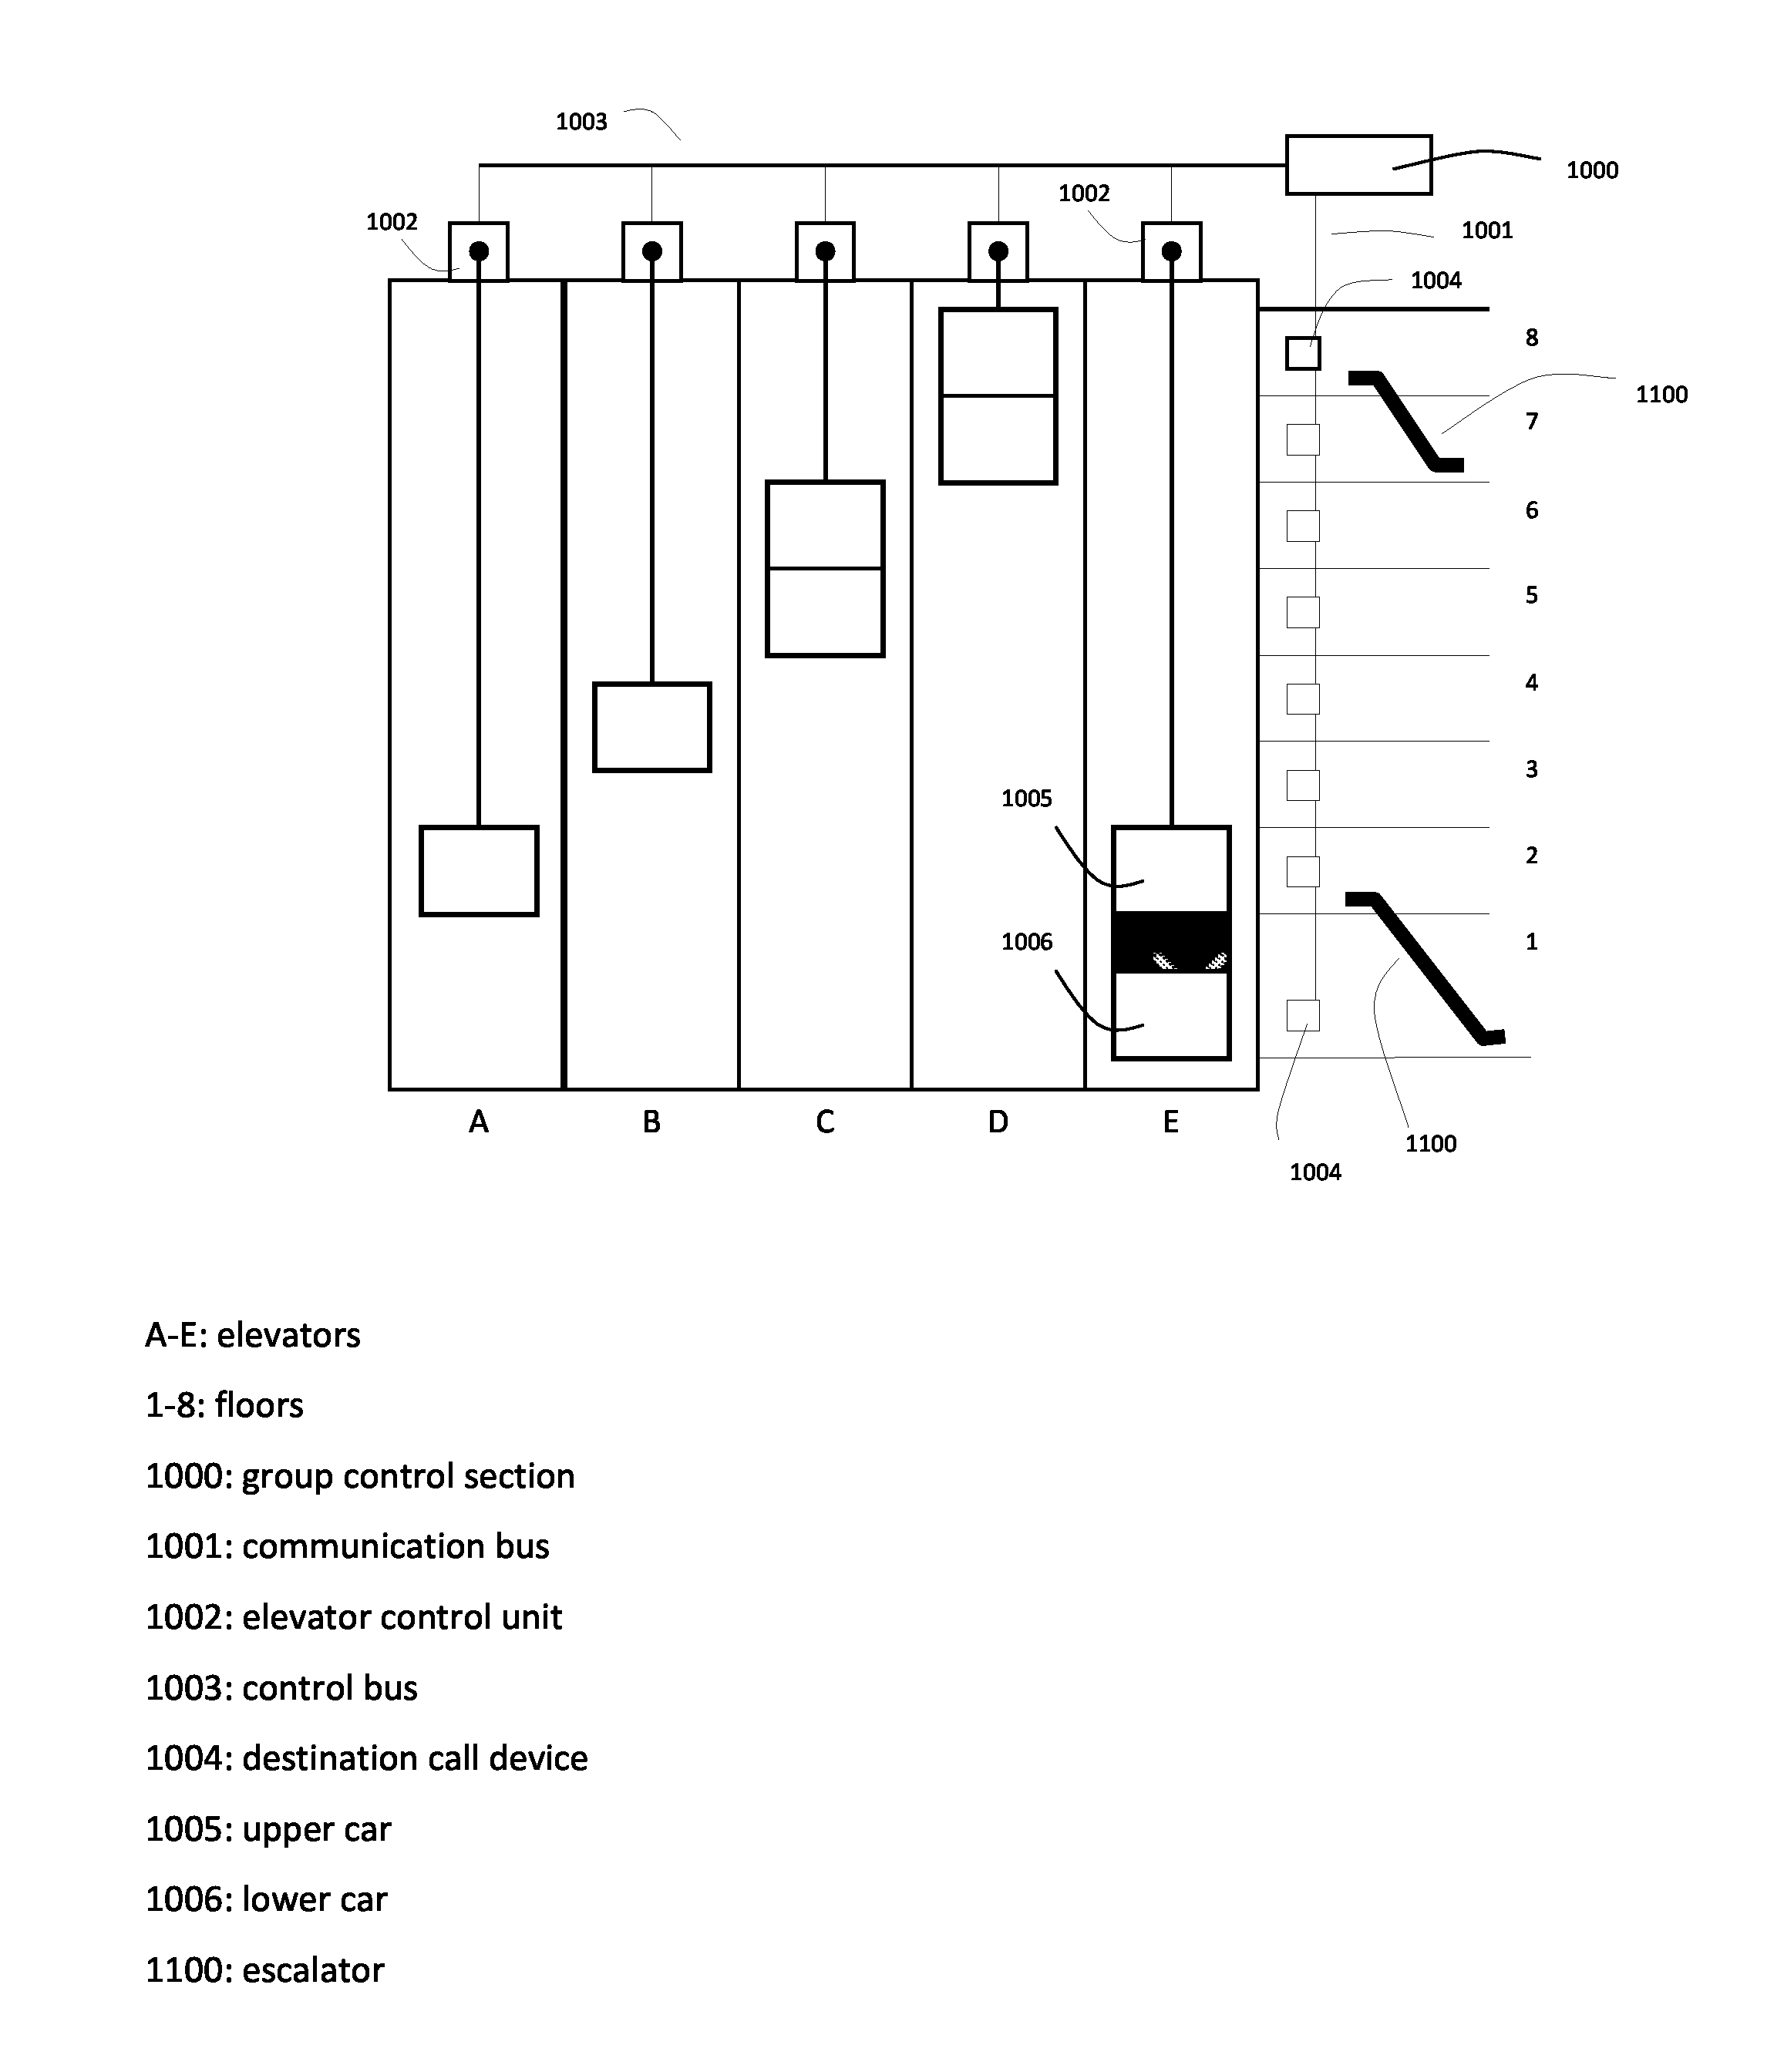 Method and system for allocation of destination calls in elevator system